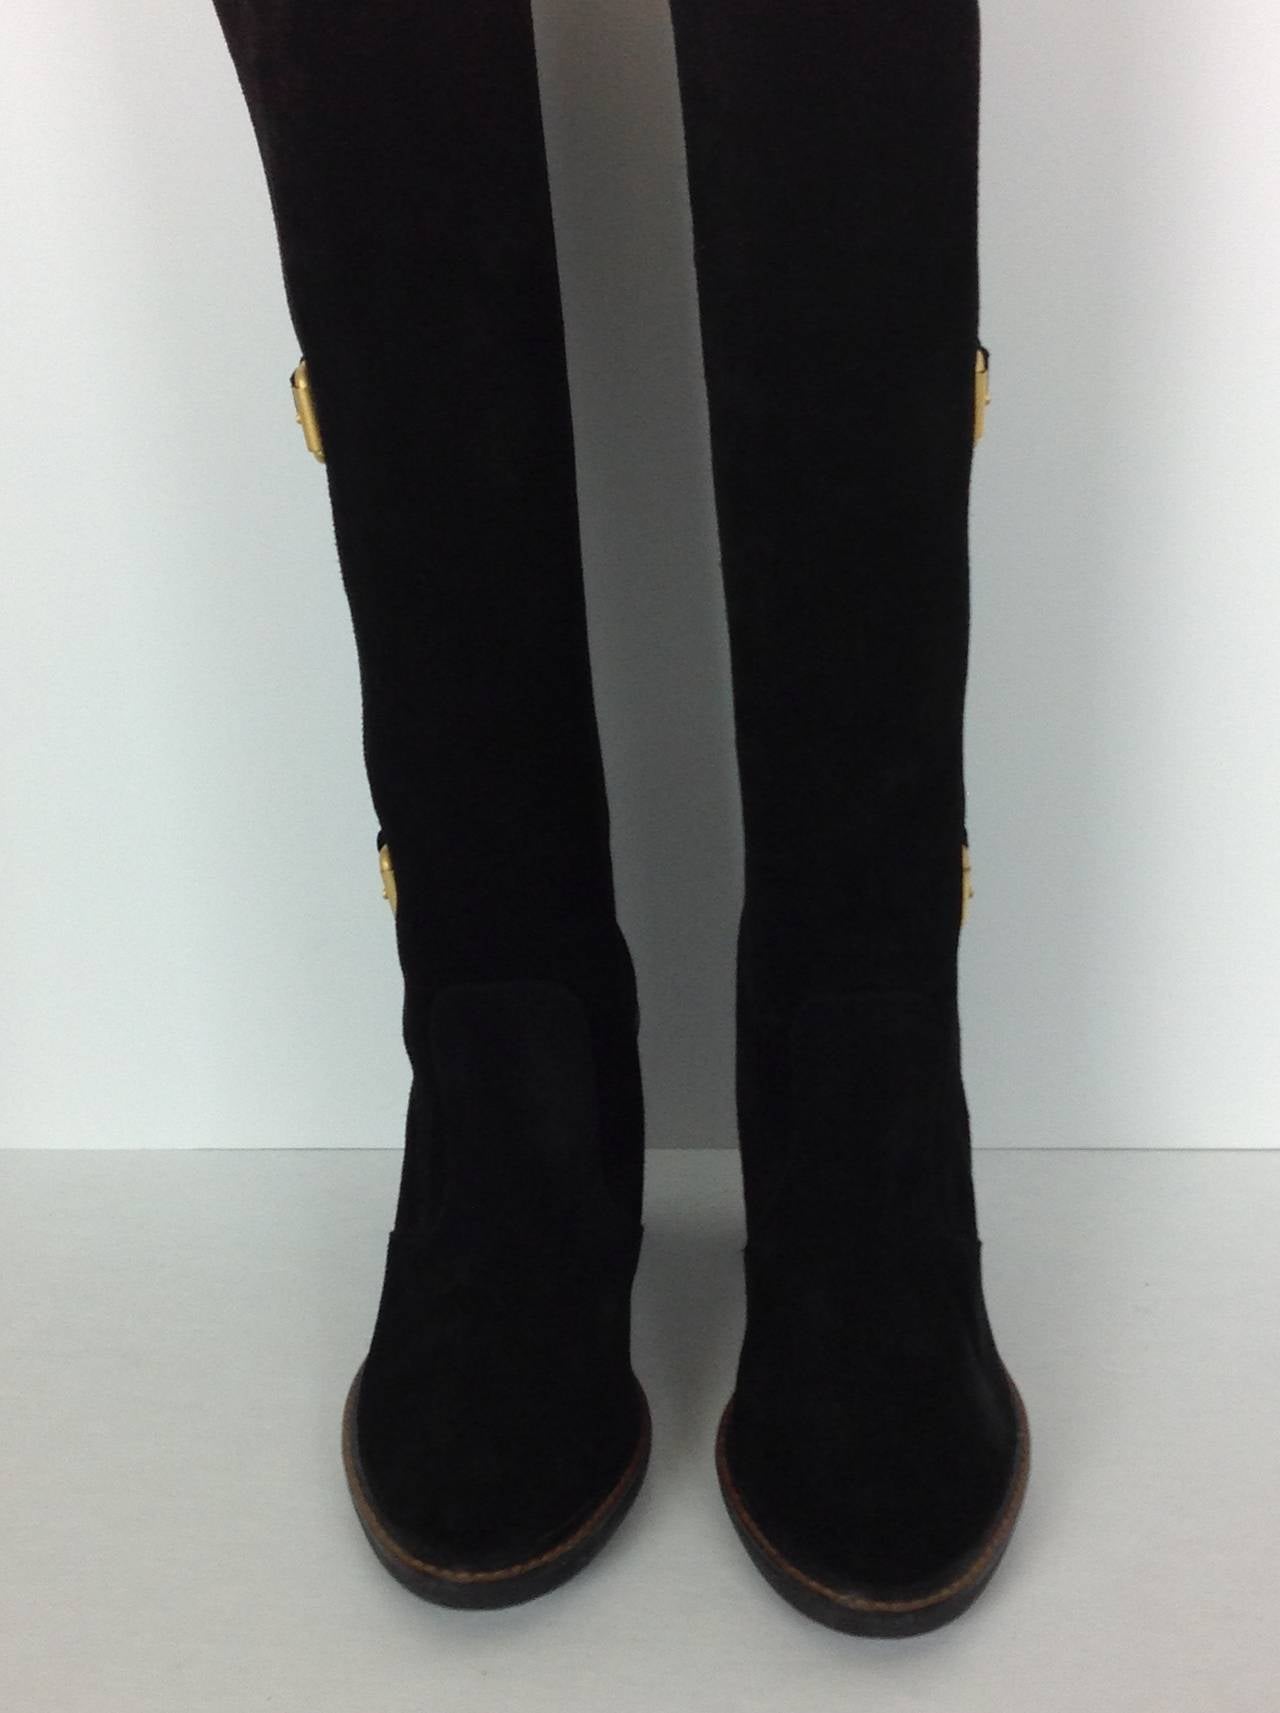 Brand NEW Fendi buckle boots in black suede.
3.50